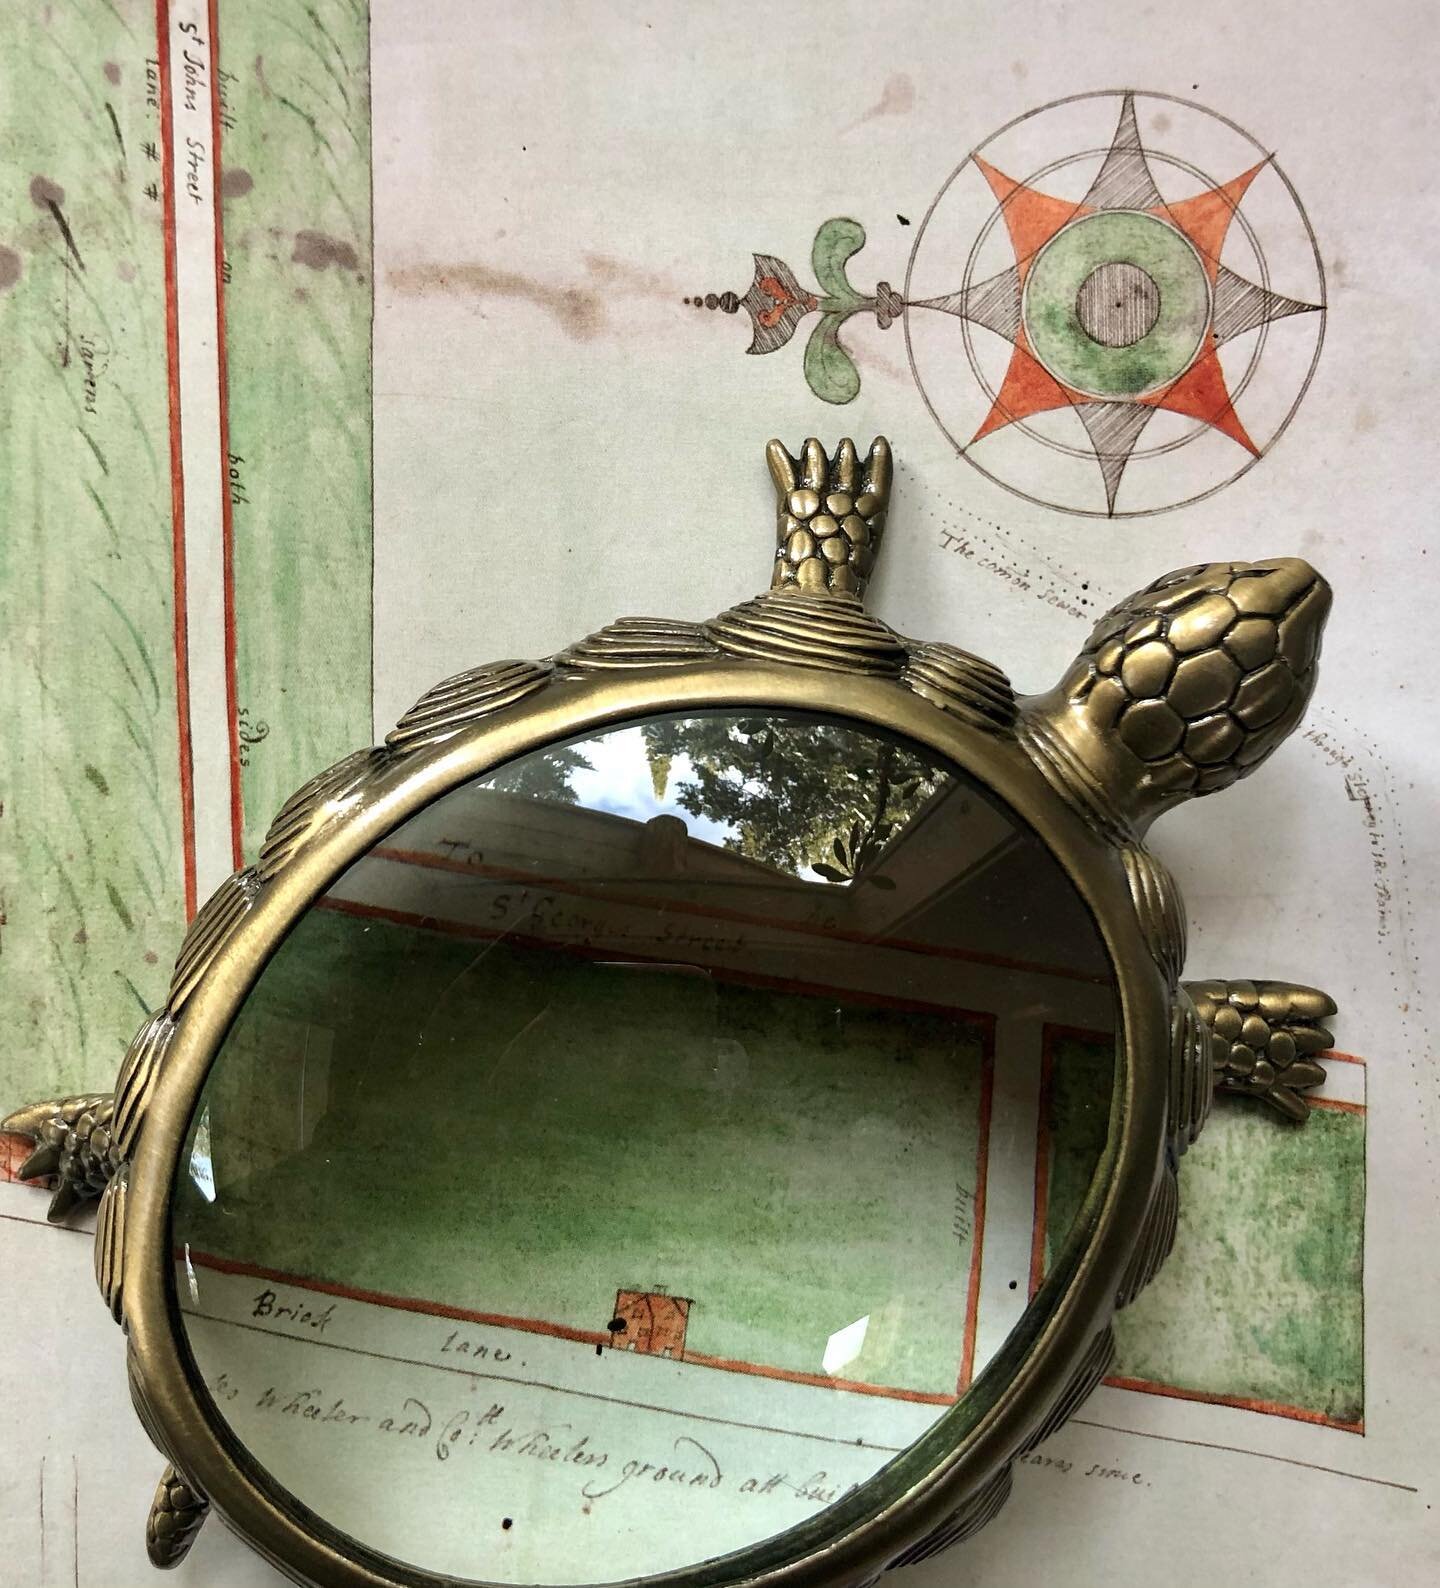 Don't overlook the details. Tortoise magnifier headed to a home library design project (though I'm tempted to keep him here with me). Sidenote: not to worry, rare book friends, this is a reprint of a rather old map in a spanking new book. No heavy tu